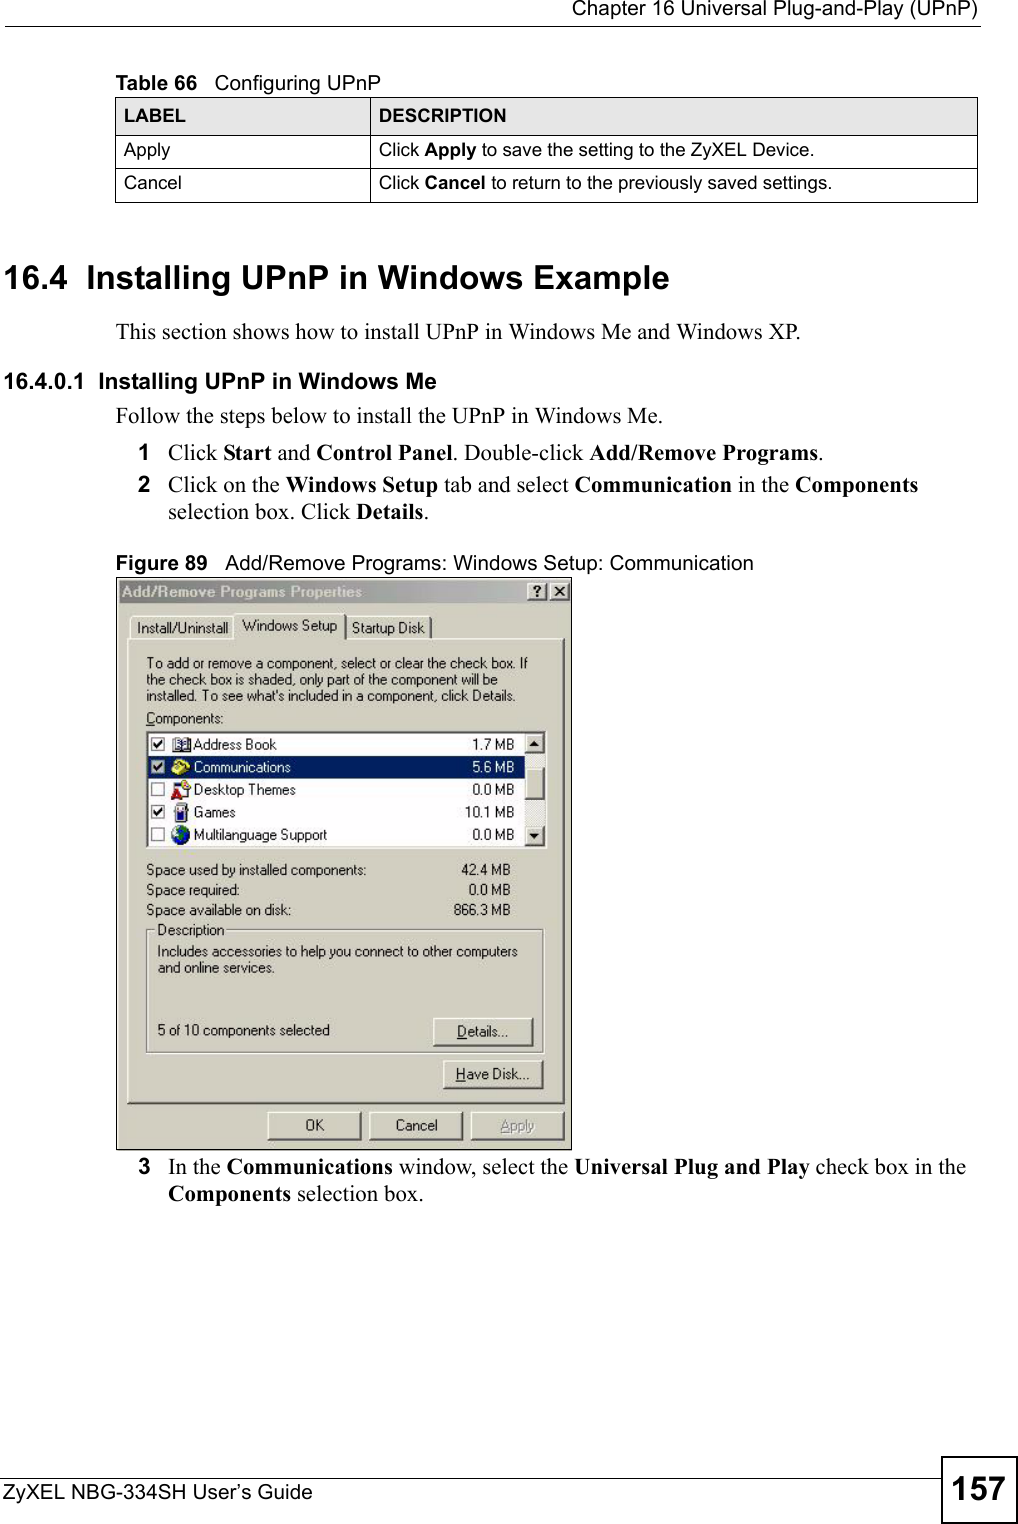  Chapter 16 Universal Plug-and-Play (UPnP)ZyXEL NBG-334SH User’s Guide 15716.4  Installing UPnP in Windows ExampleThis section shows how to install UPnP in Windows Me and Windows XP.  16.4.0.1  Installing UPnP in Windows MeFollow the steps below to install the UPnP in Windows Me. 1Click Start and Control Panel. Double-click Add/Remove Programs.2Click on the Windows Setup tab and select Communication in the Components selection box. Click Details.  Figure 89   Add/Remove Programs: Windows Setup: Communication 3In the Communications window, select the Universal Plug and Play check box in the Components selection box. Apply Click Apply to save the setting to the ZyXEL Device.Cancel Click Cancel to return to the previously saved settings.Table 66   Configuring UPnPLABEL DESCRIPTION